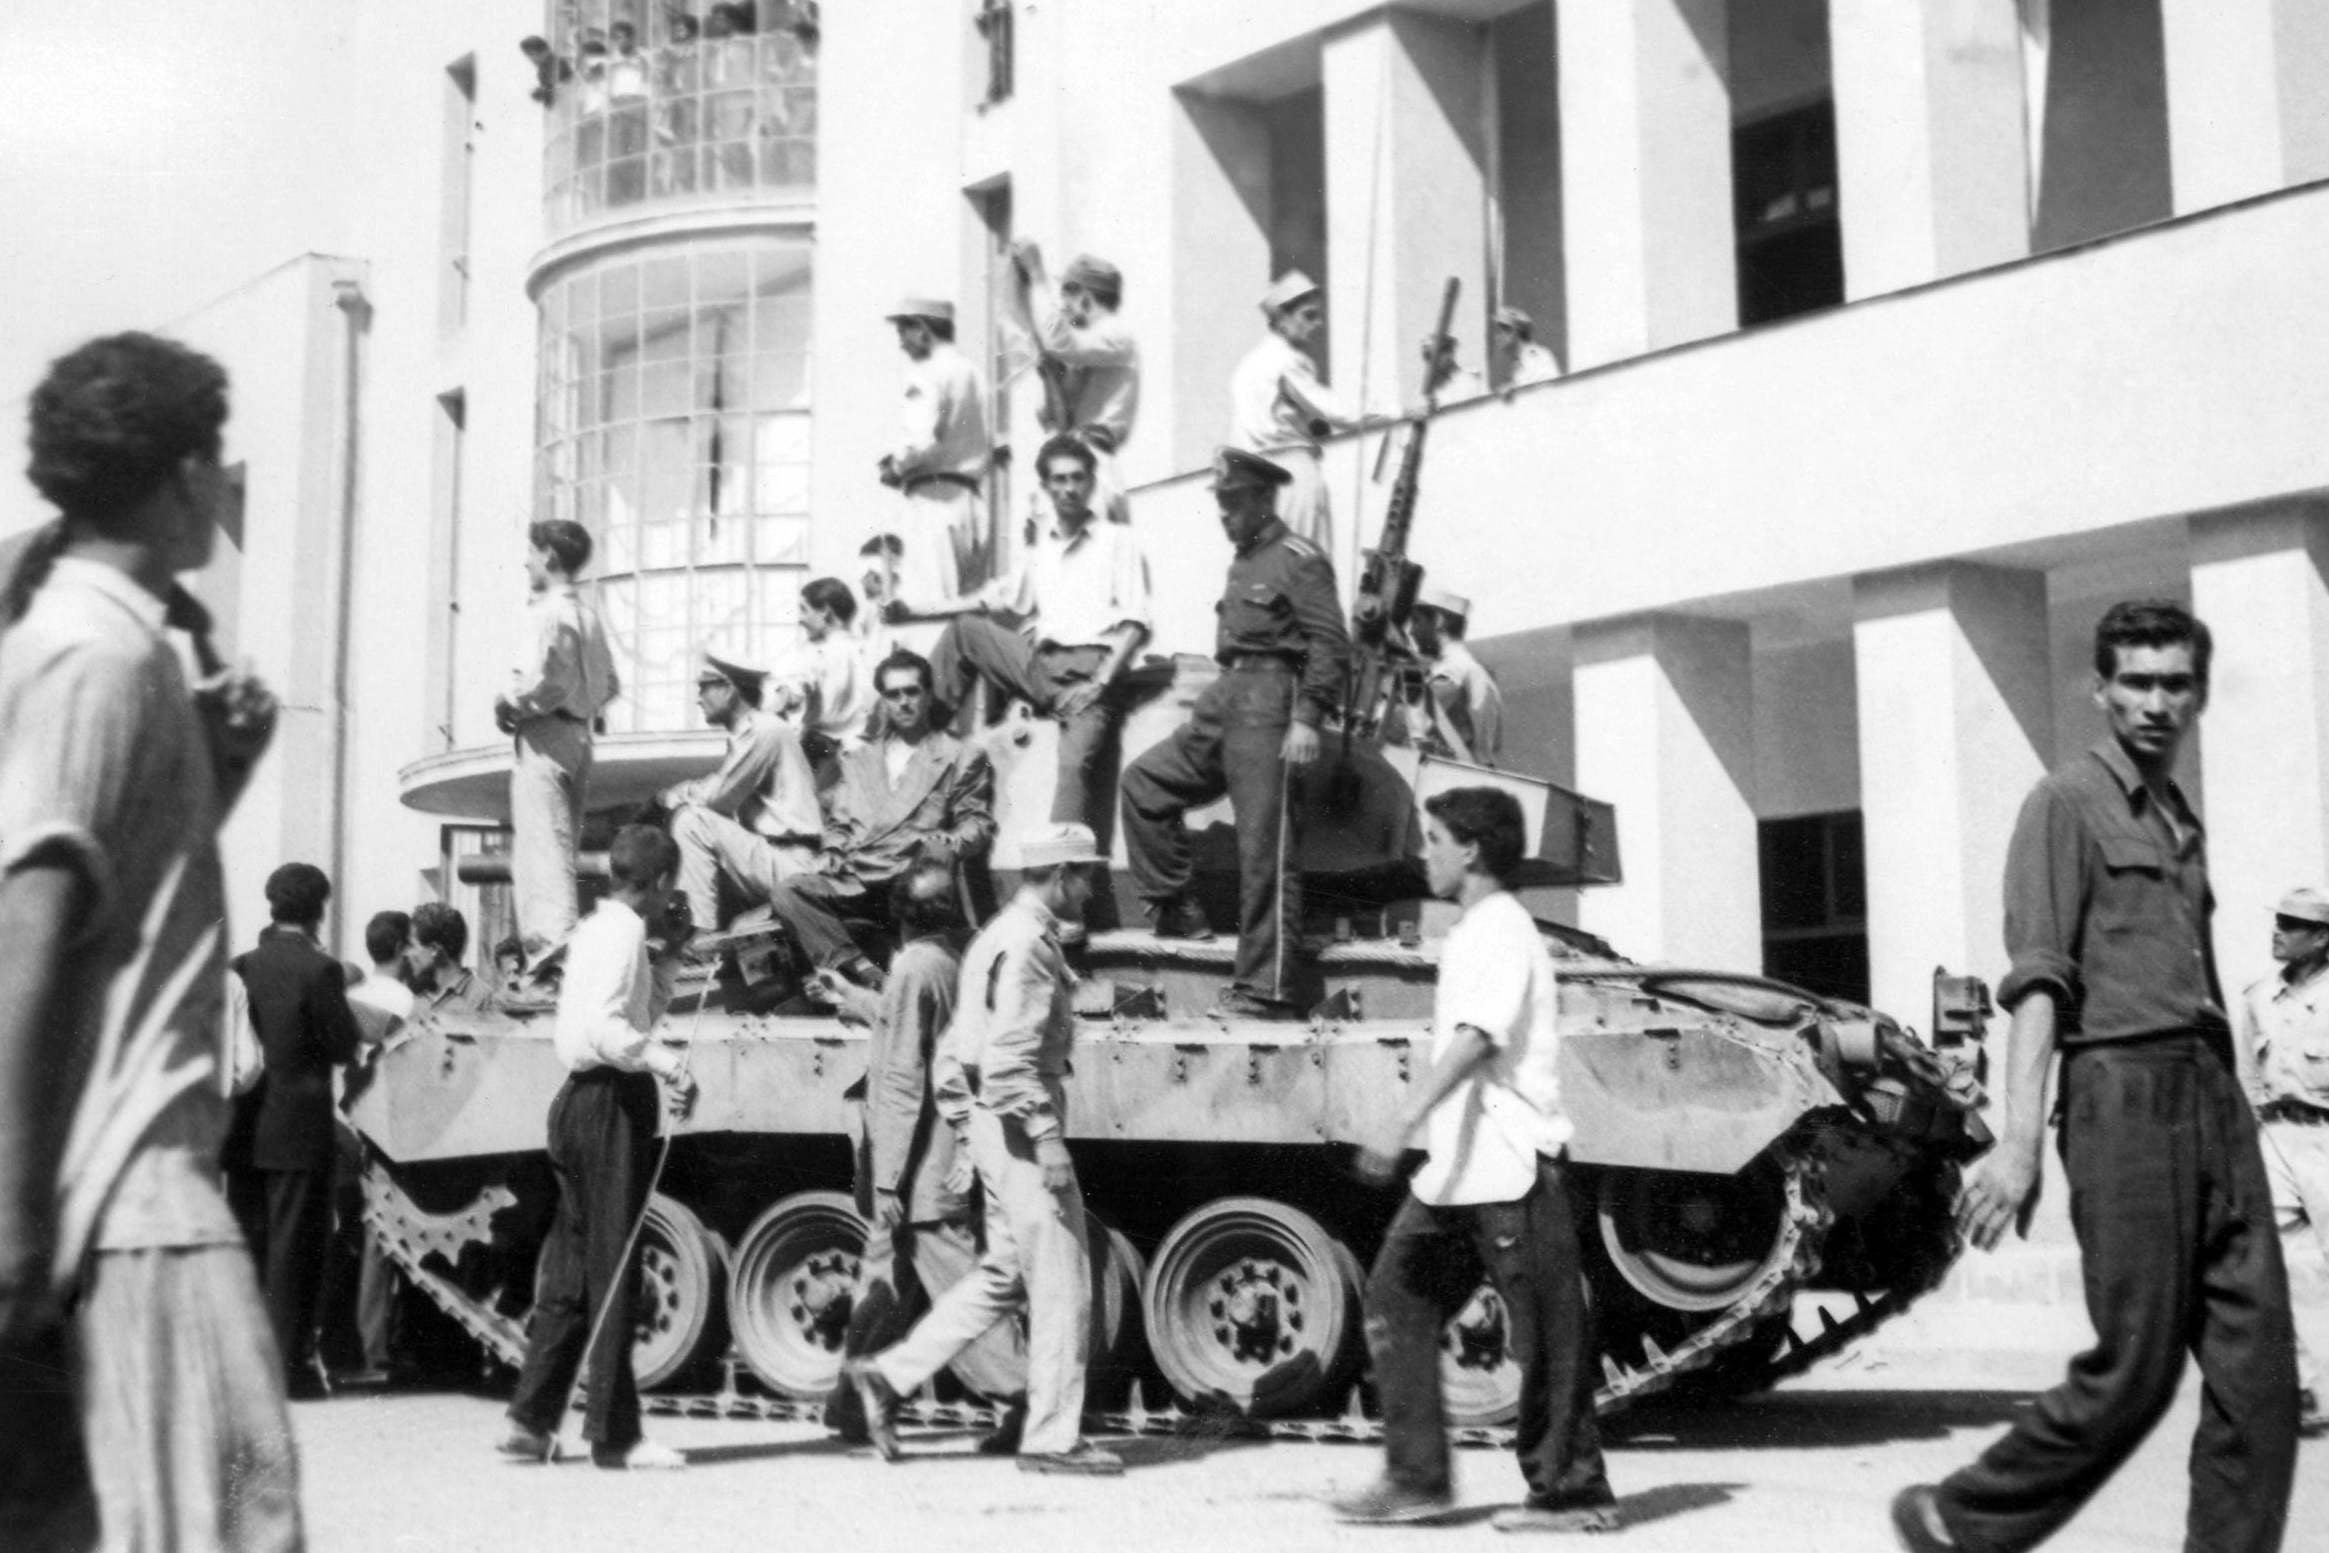 Pro-Shah troops occupying Tehran during the 1953 coup